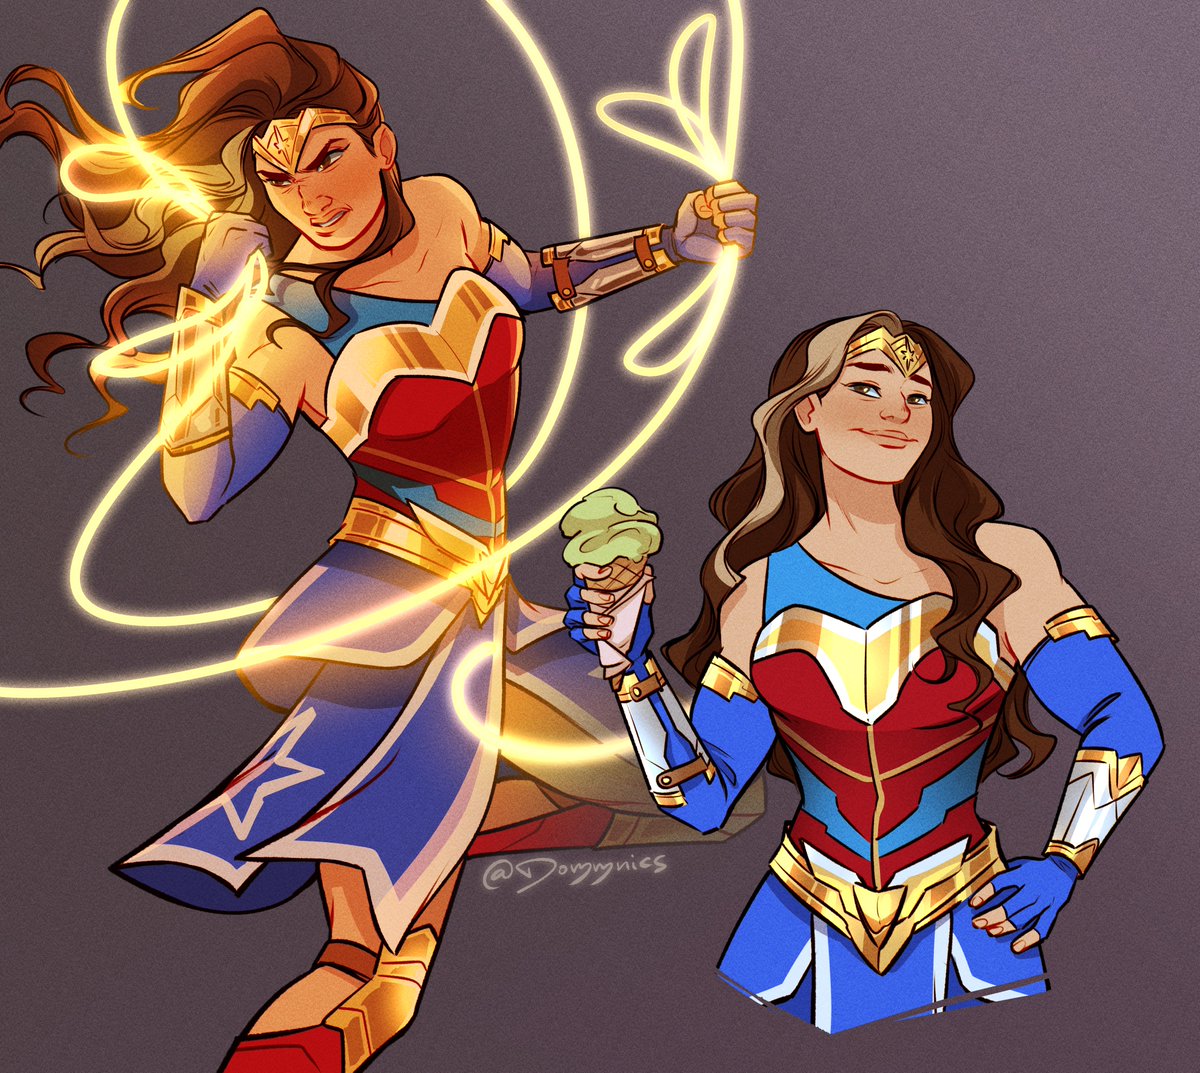 Time for an art dump. Last year, I reblogged a video on my of the cosplayer (athena.cos) as Wonder Woman, and by coincidence, she ended up reaching out to me to do a cosplay of a Wonder  Woman design I initially drew. Funny how life works! #wonderwoman #dianaprince #dc